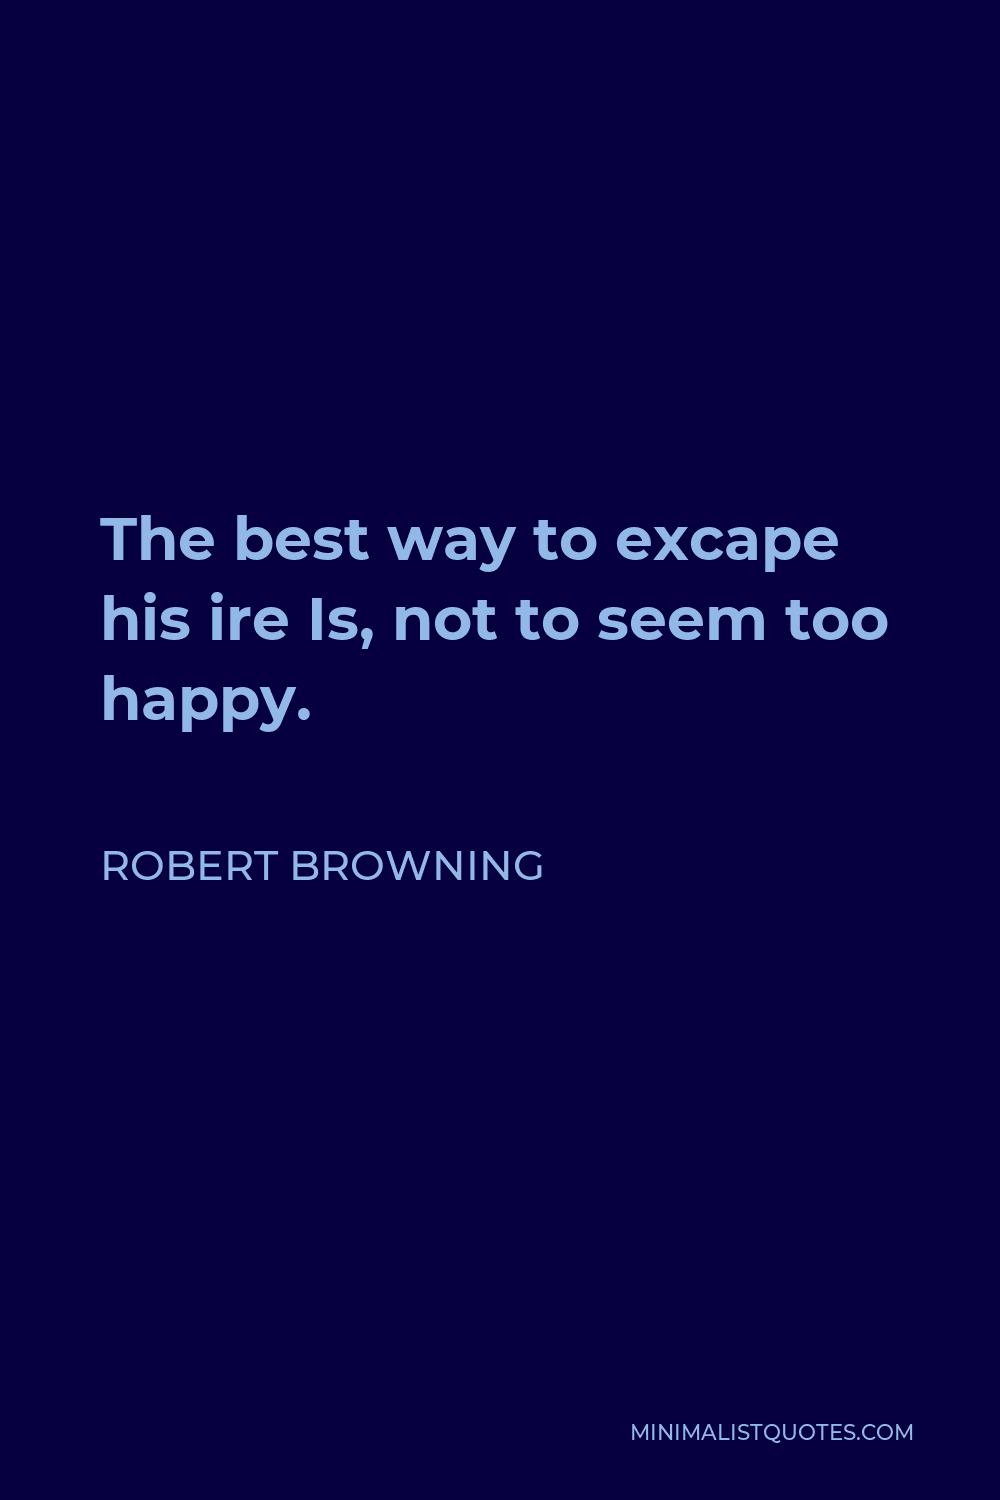 Robert Browning Quote - The best way to excape his ire Is, not to seem too happy.